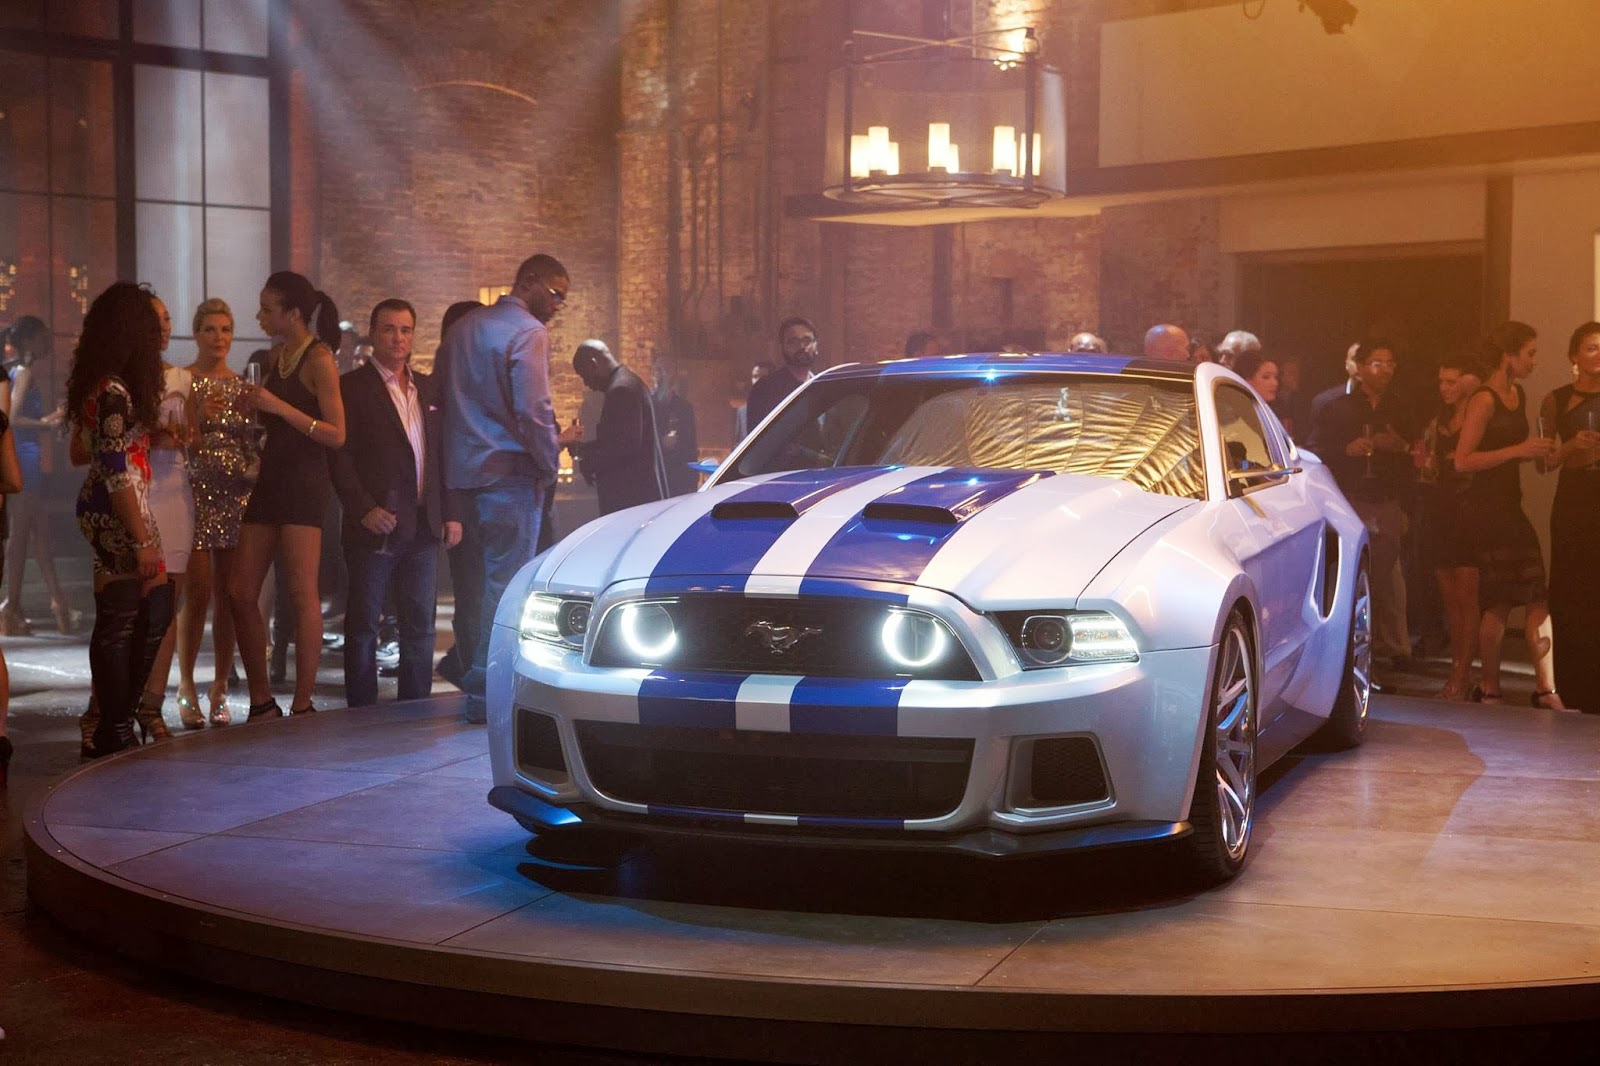 Movie Review: 'Need for Speed